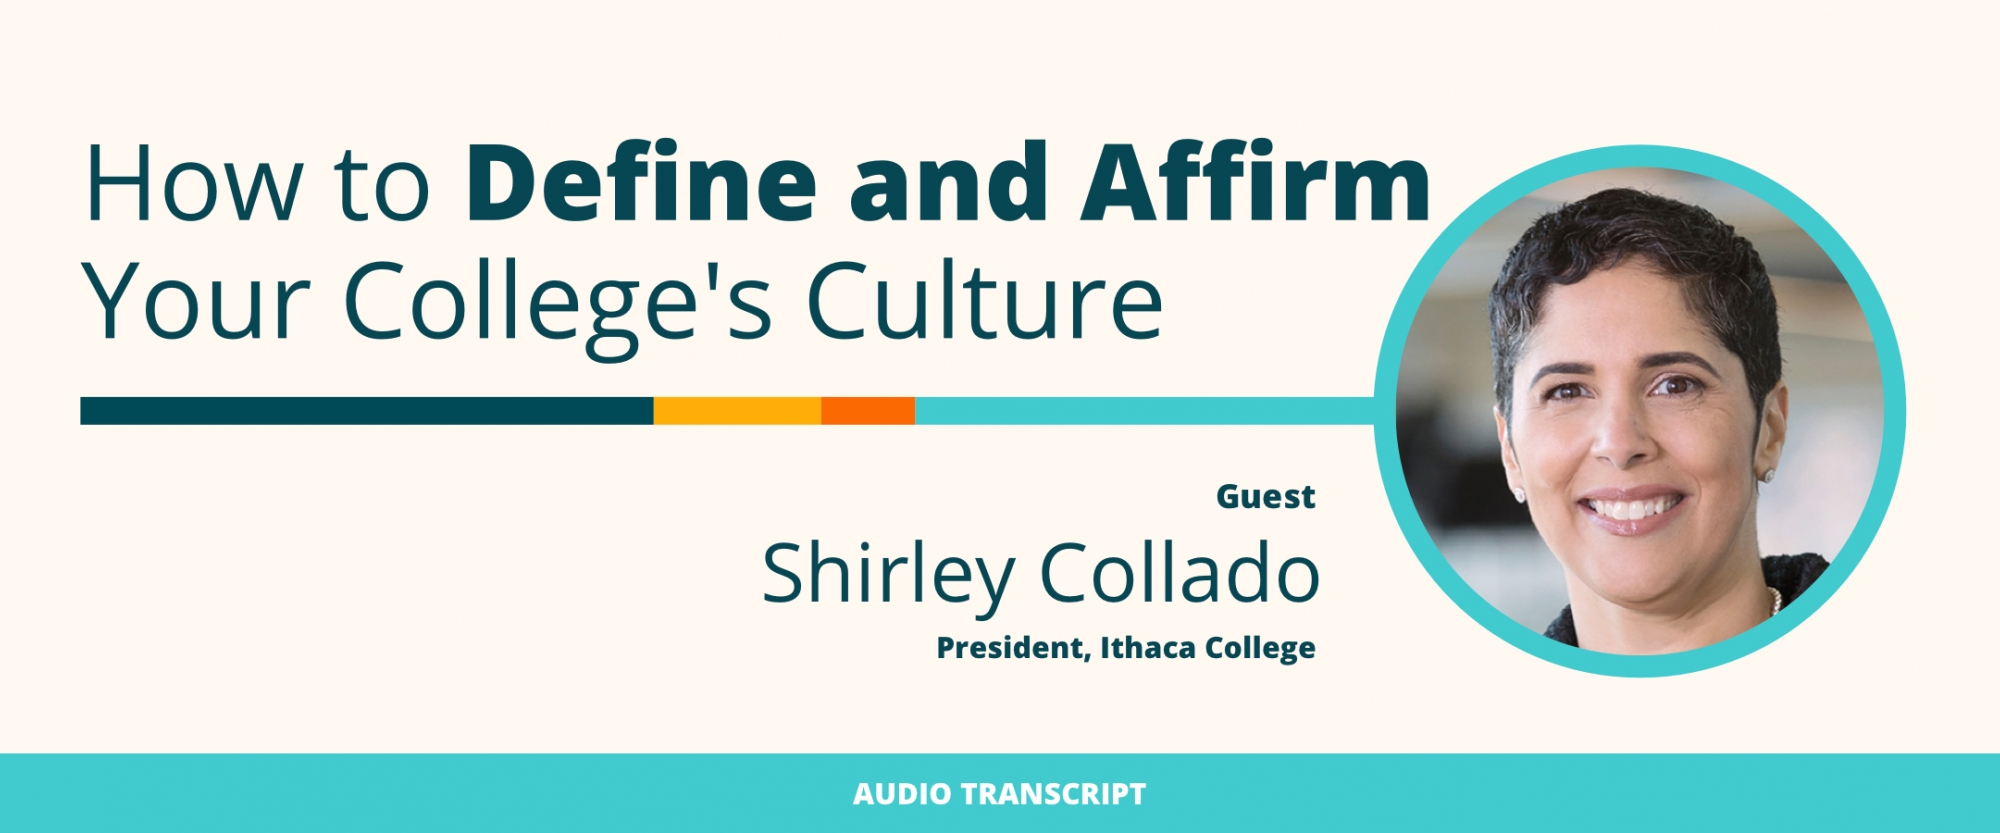 Weekly Wisdom Episode 6: Transcript of Conversation With Shirley Collado, Ithaca College President